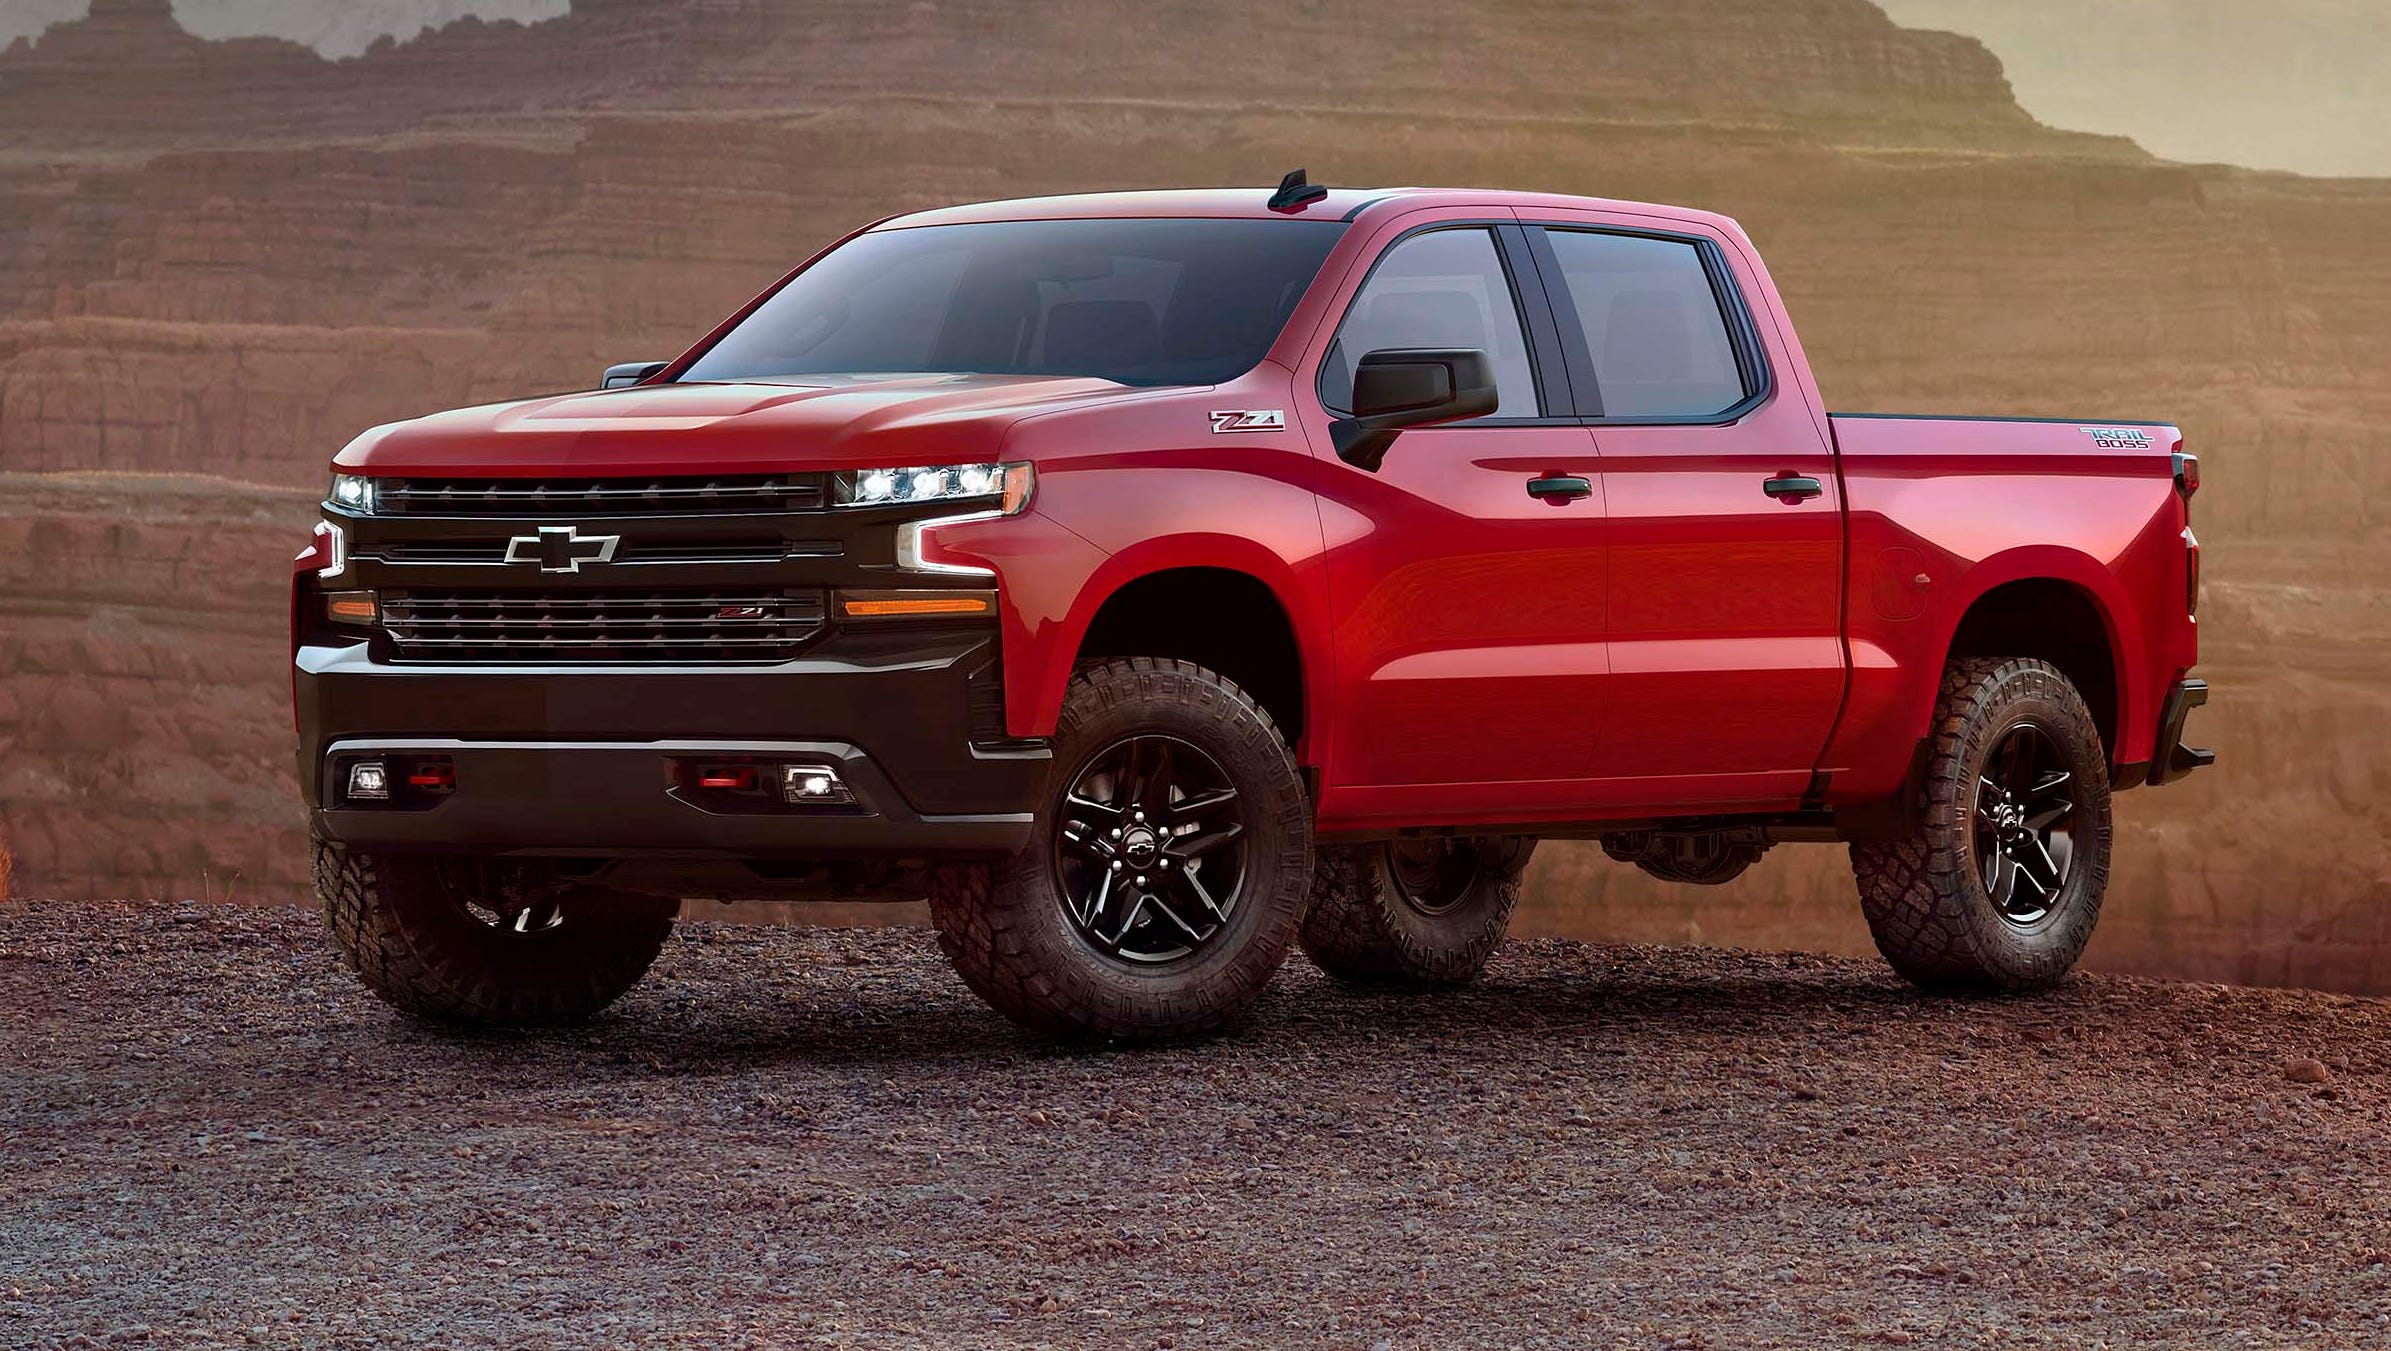 The 2019 Chevy Silverado gets an all-new look for 2019 with thinner headlights, a more sculpted body, and mirrors mounted on the doors for better visibility.